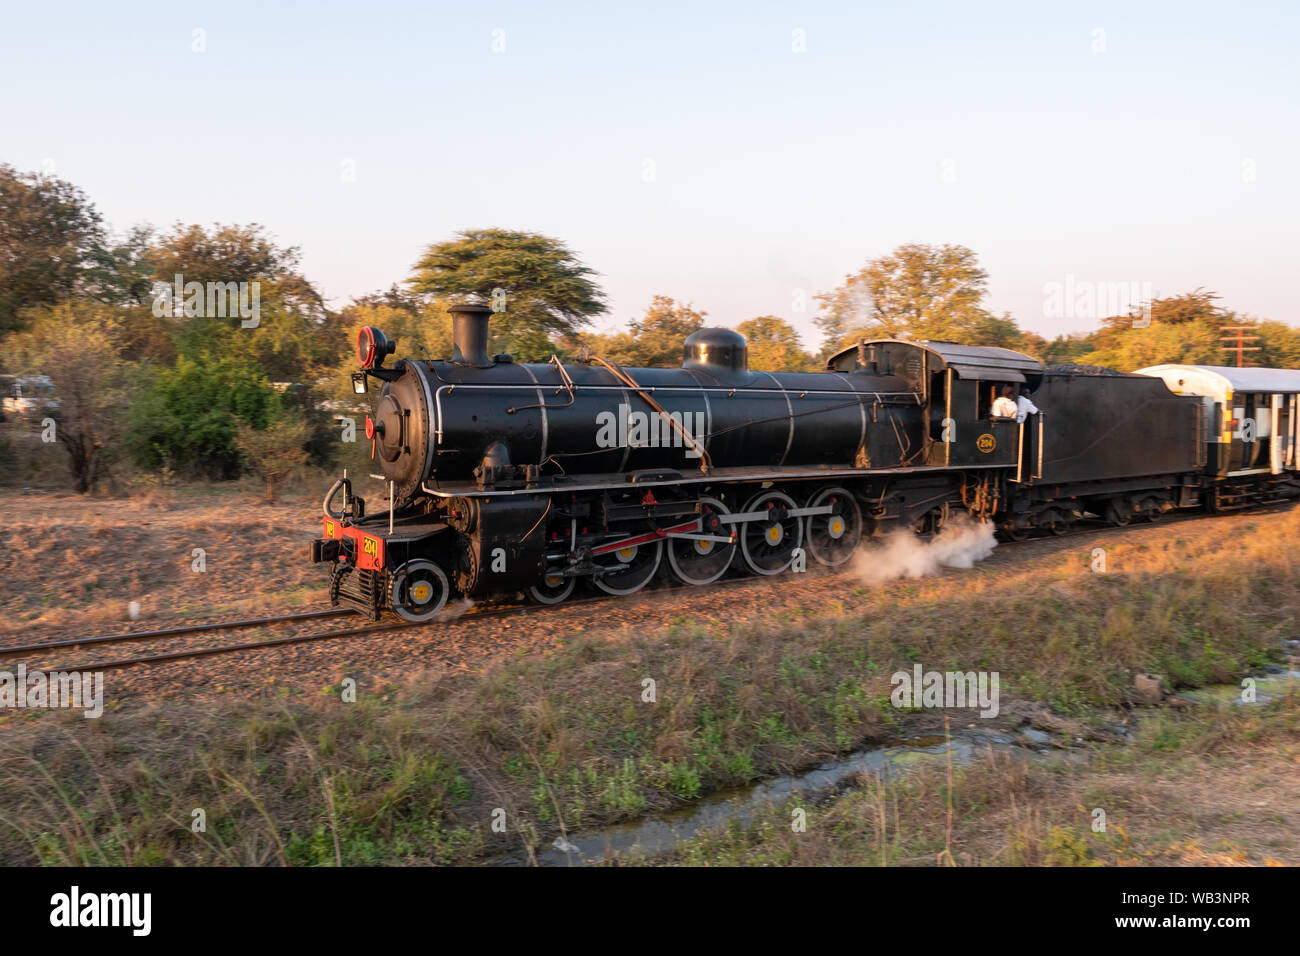 Victoria Falls, Zimbabwe - August 2 2019: Steam Train with Engine at Victoria Falls, pulled by Zambia Railways Steam locomotive 204. Stock Photo